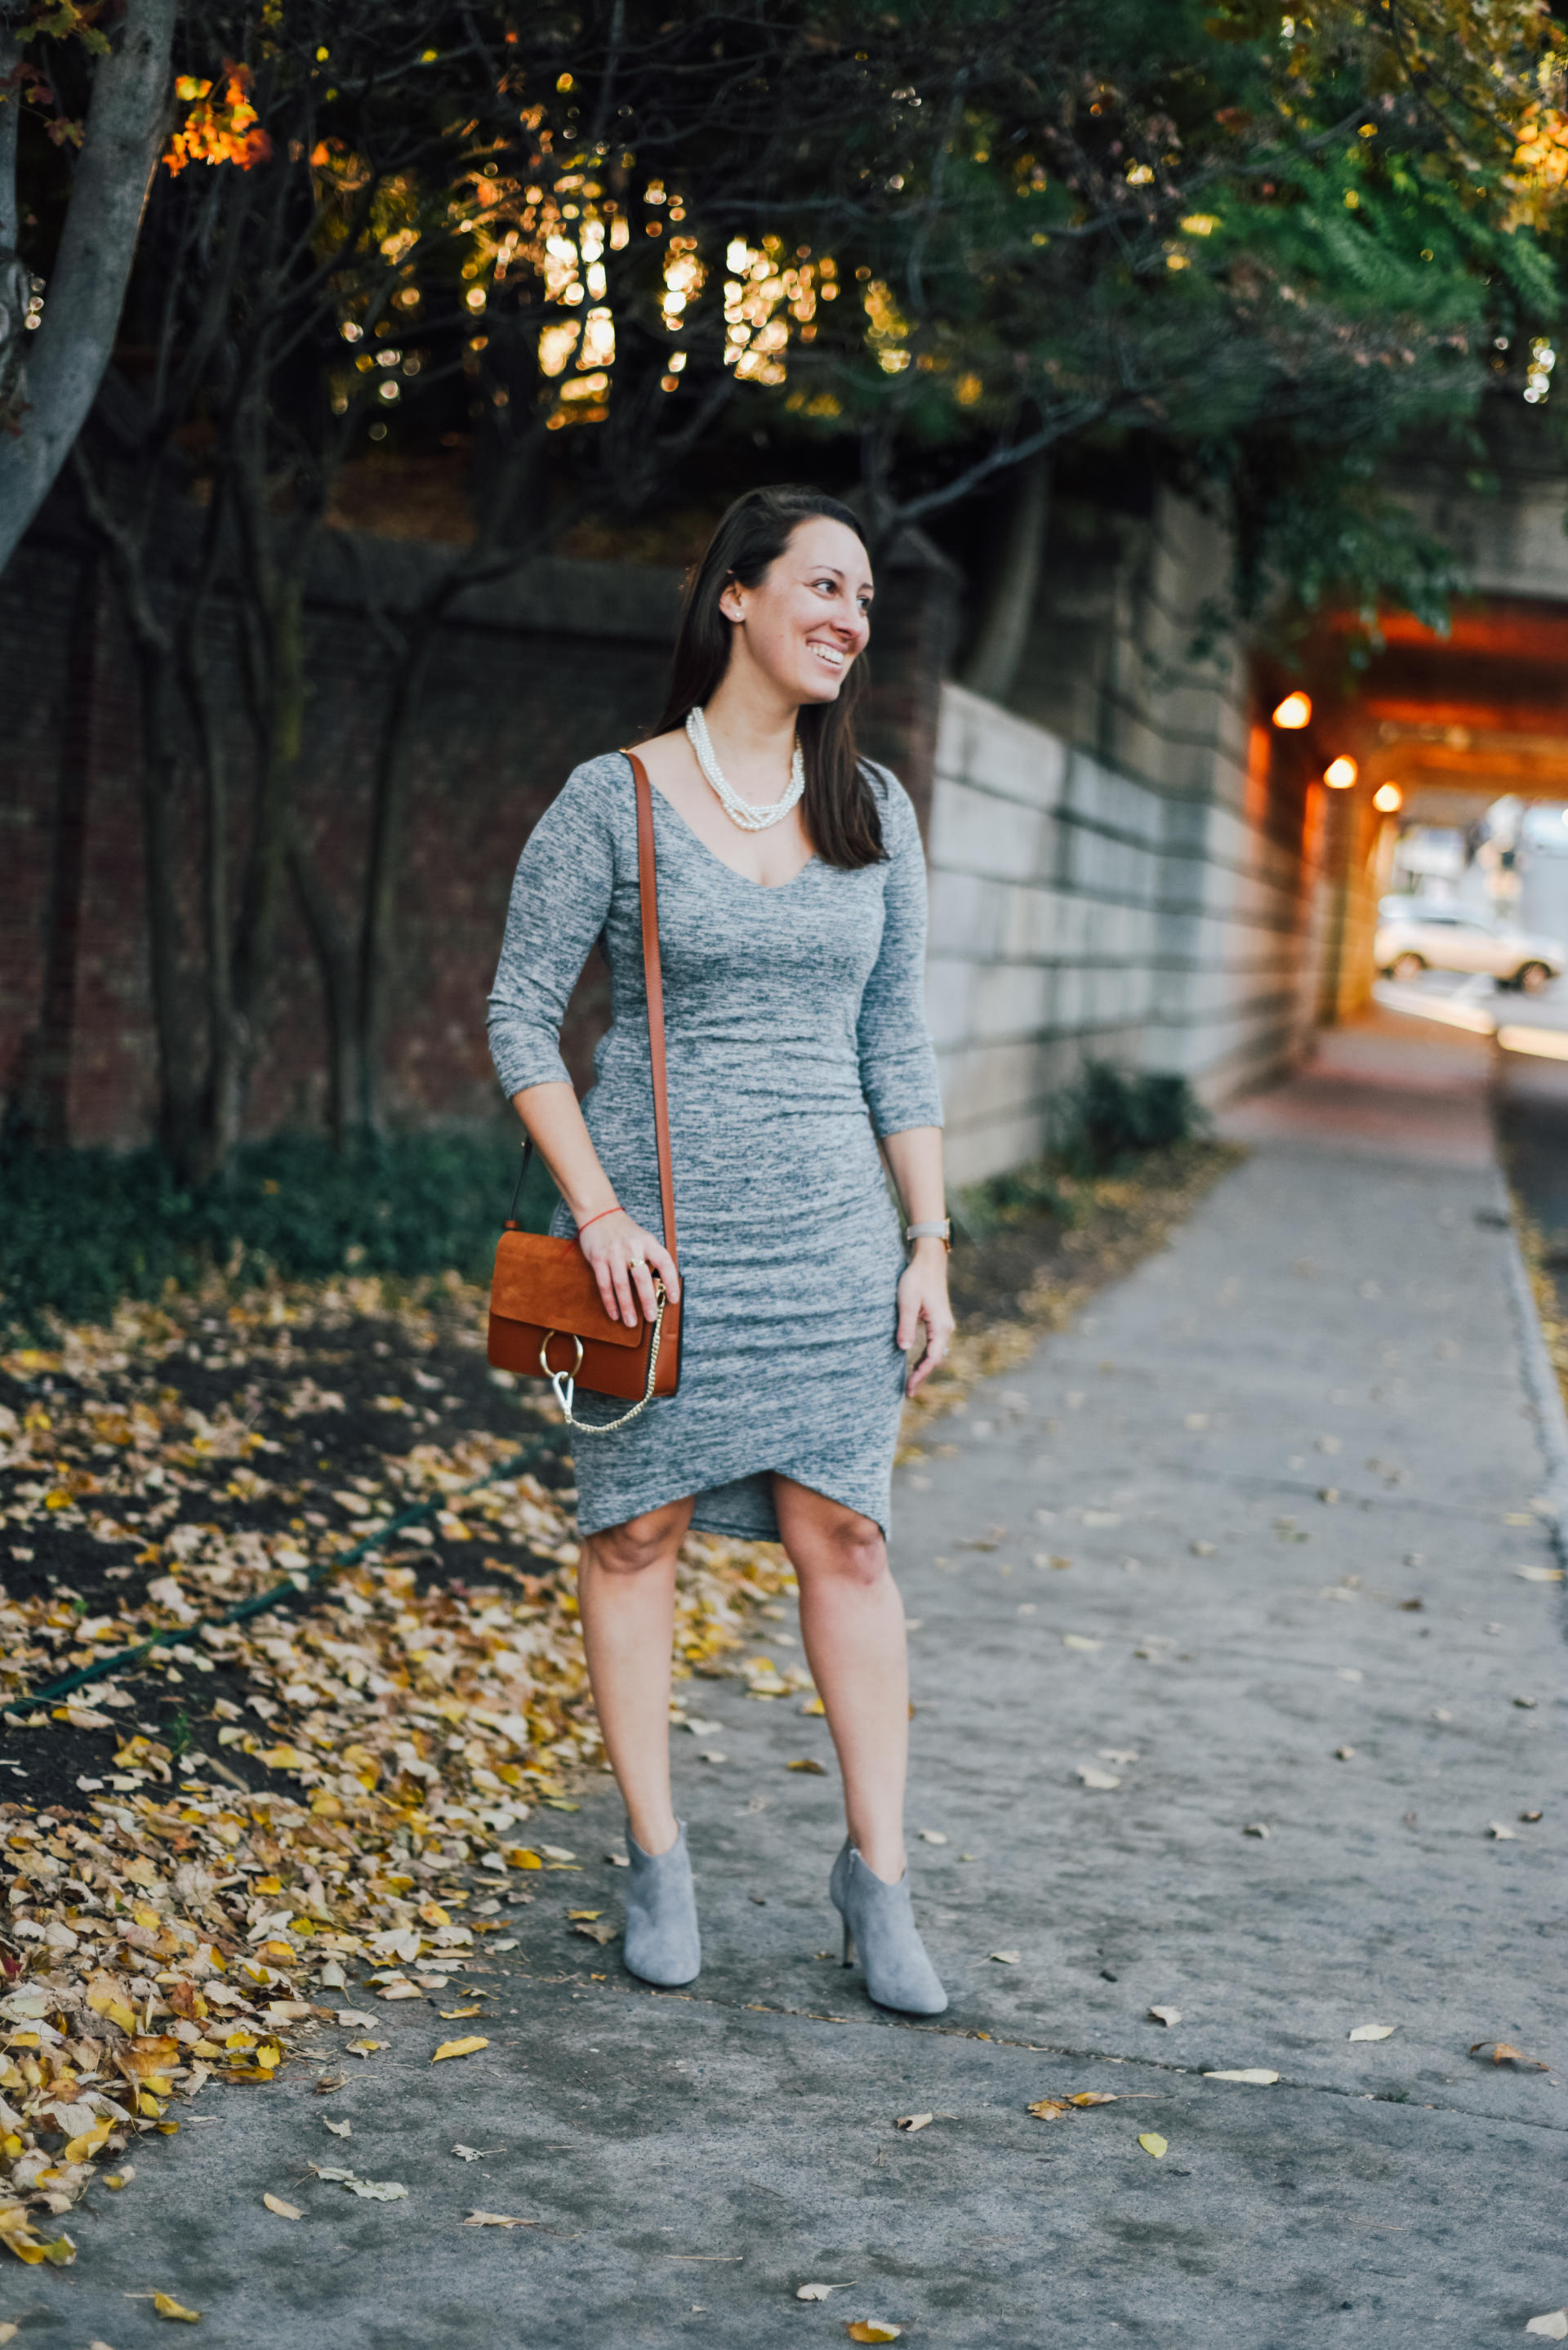 STYLE: My Holiday Party Dress